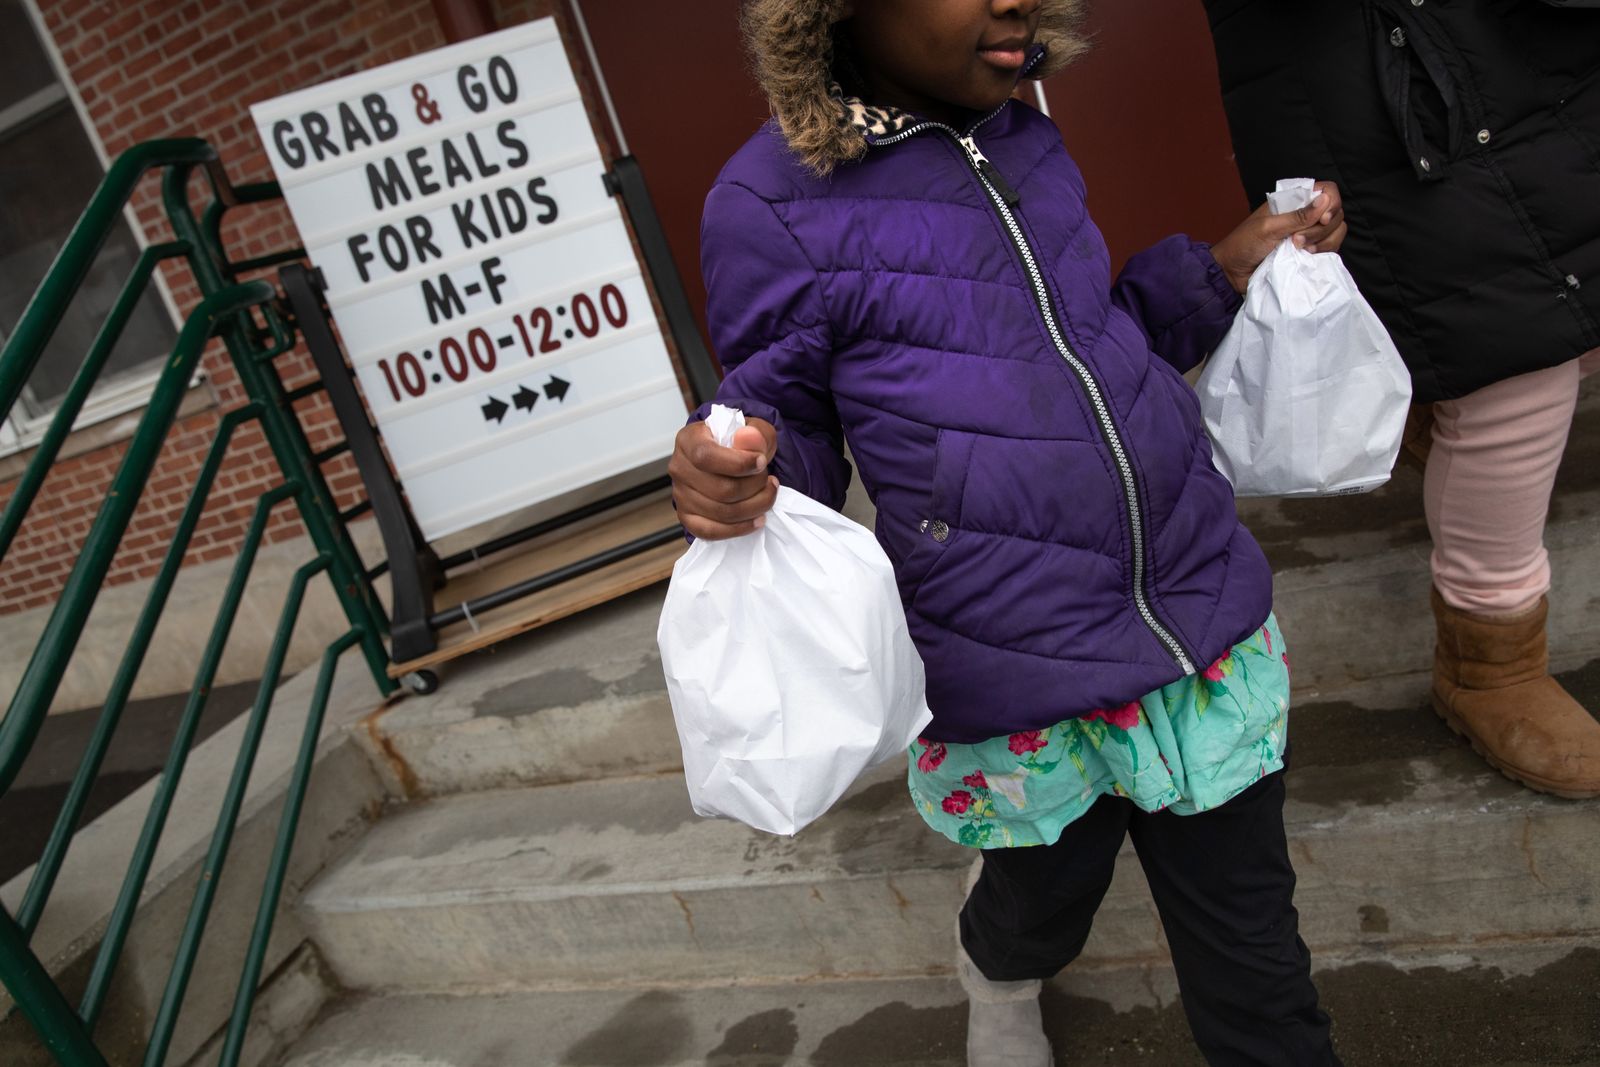 A student carries home bagged meals given out as part of Stamford Public Schools' "Grab and Go Meals for Kids" program, which is part of the city's response to the coronavirus pandemic on March 17, 20